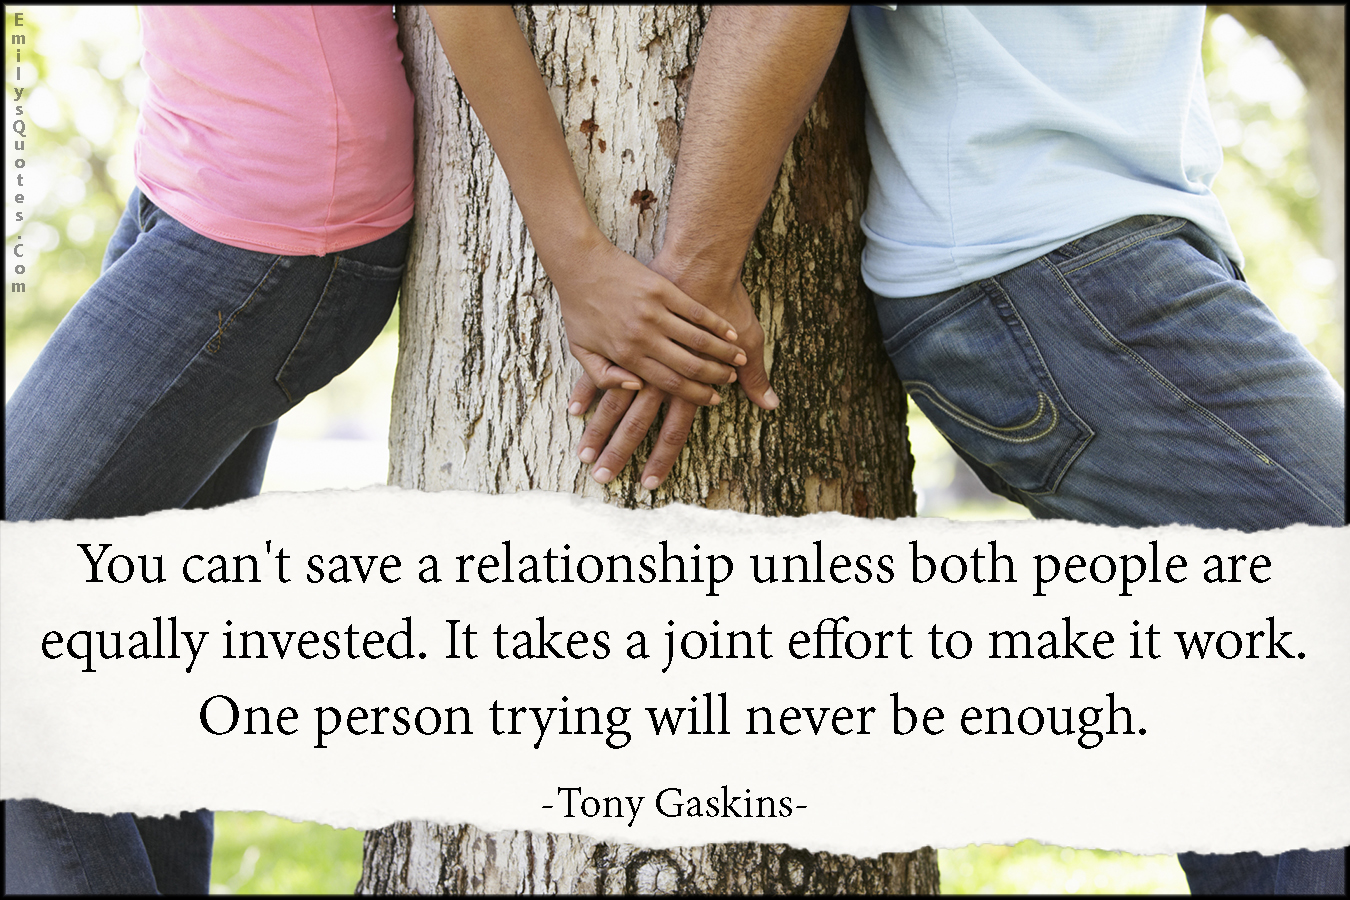 You can’t save a relationship unless both people are equally invested. It takes a joint effort to make it work. One person trying will never be enough